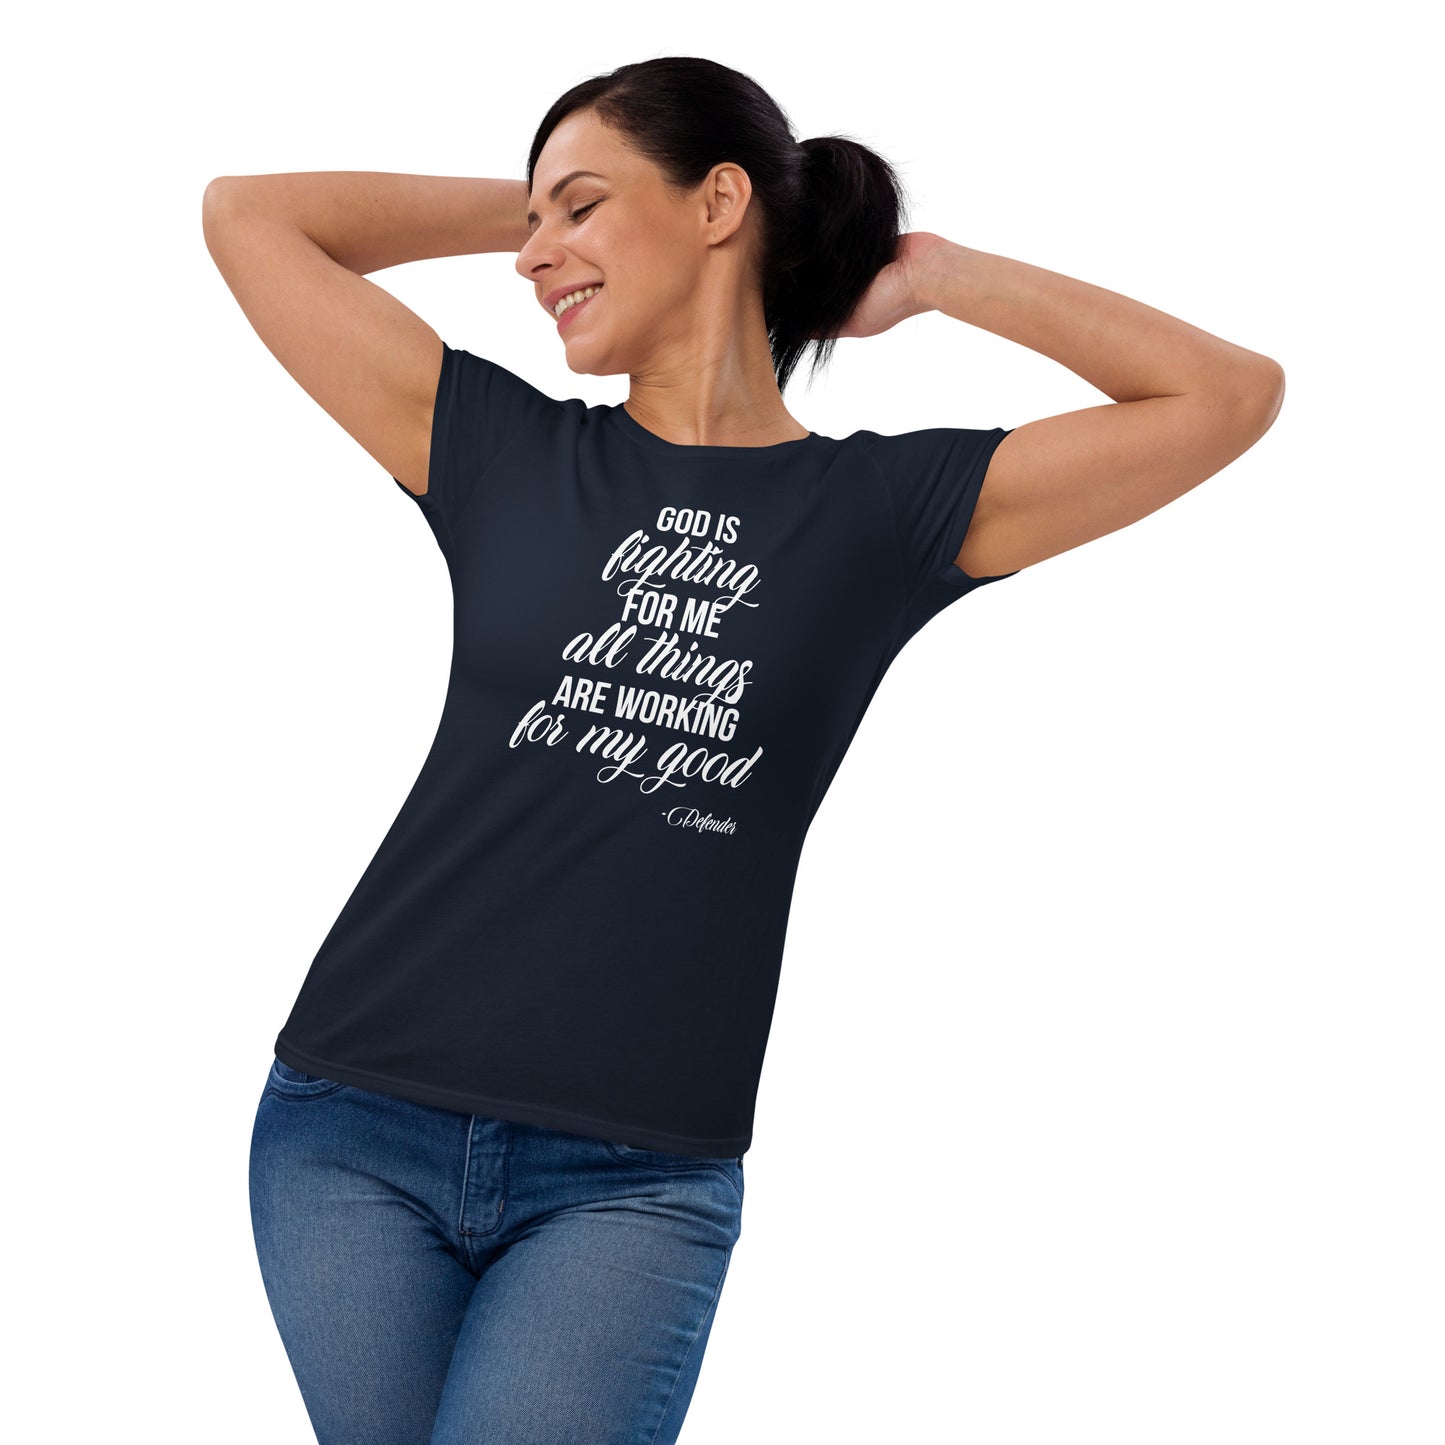 God is Fighting For Me and All Things are Working For My Good Women's short sleeve t-shirt